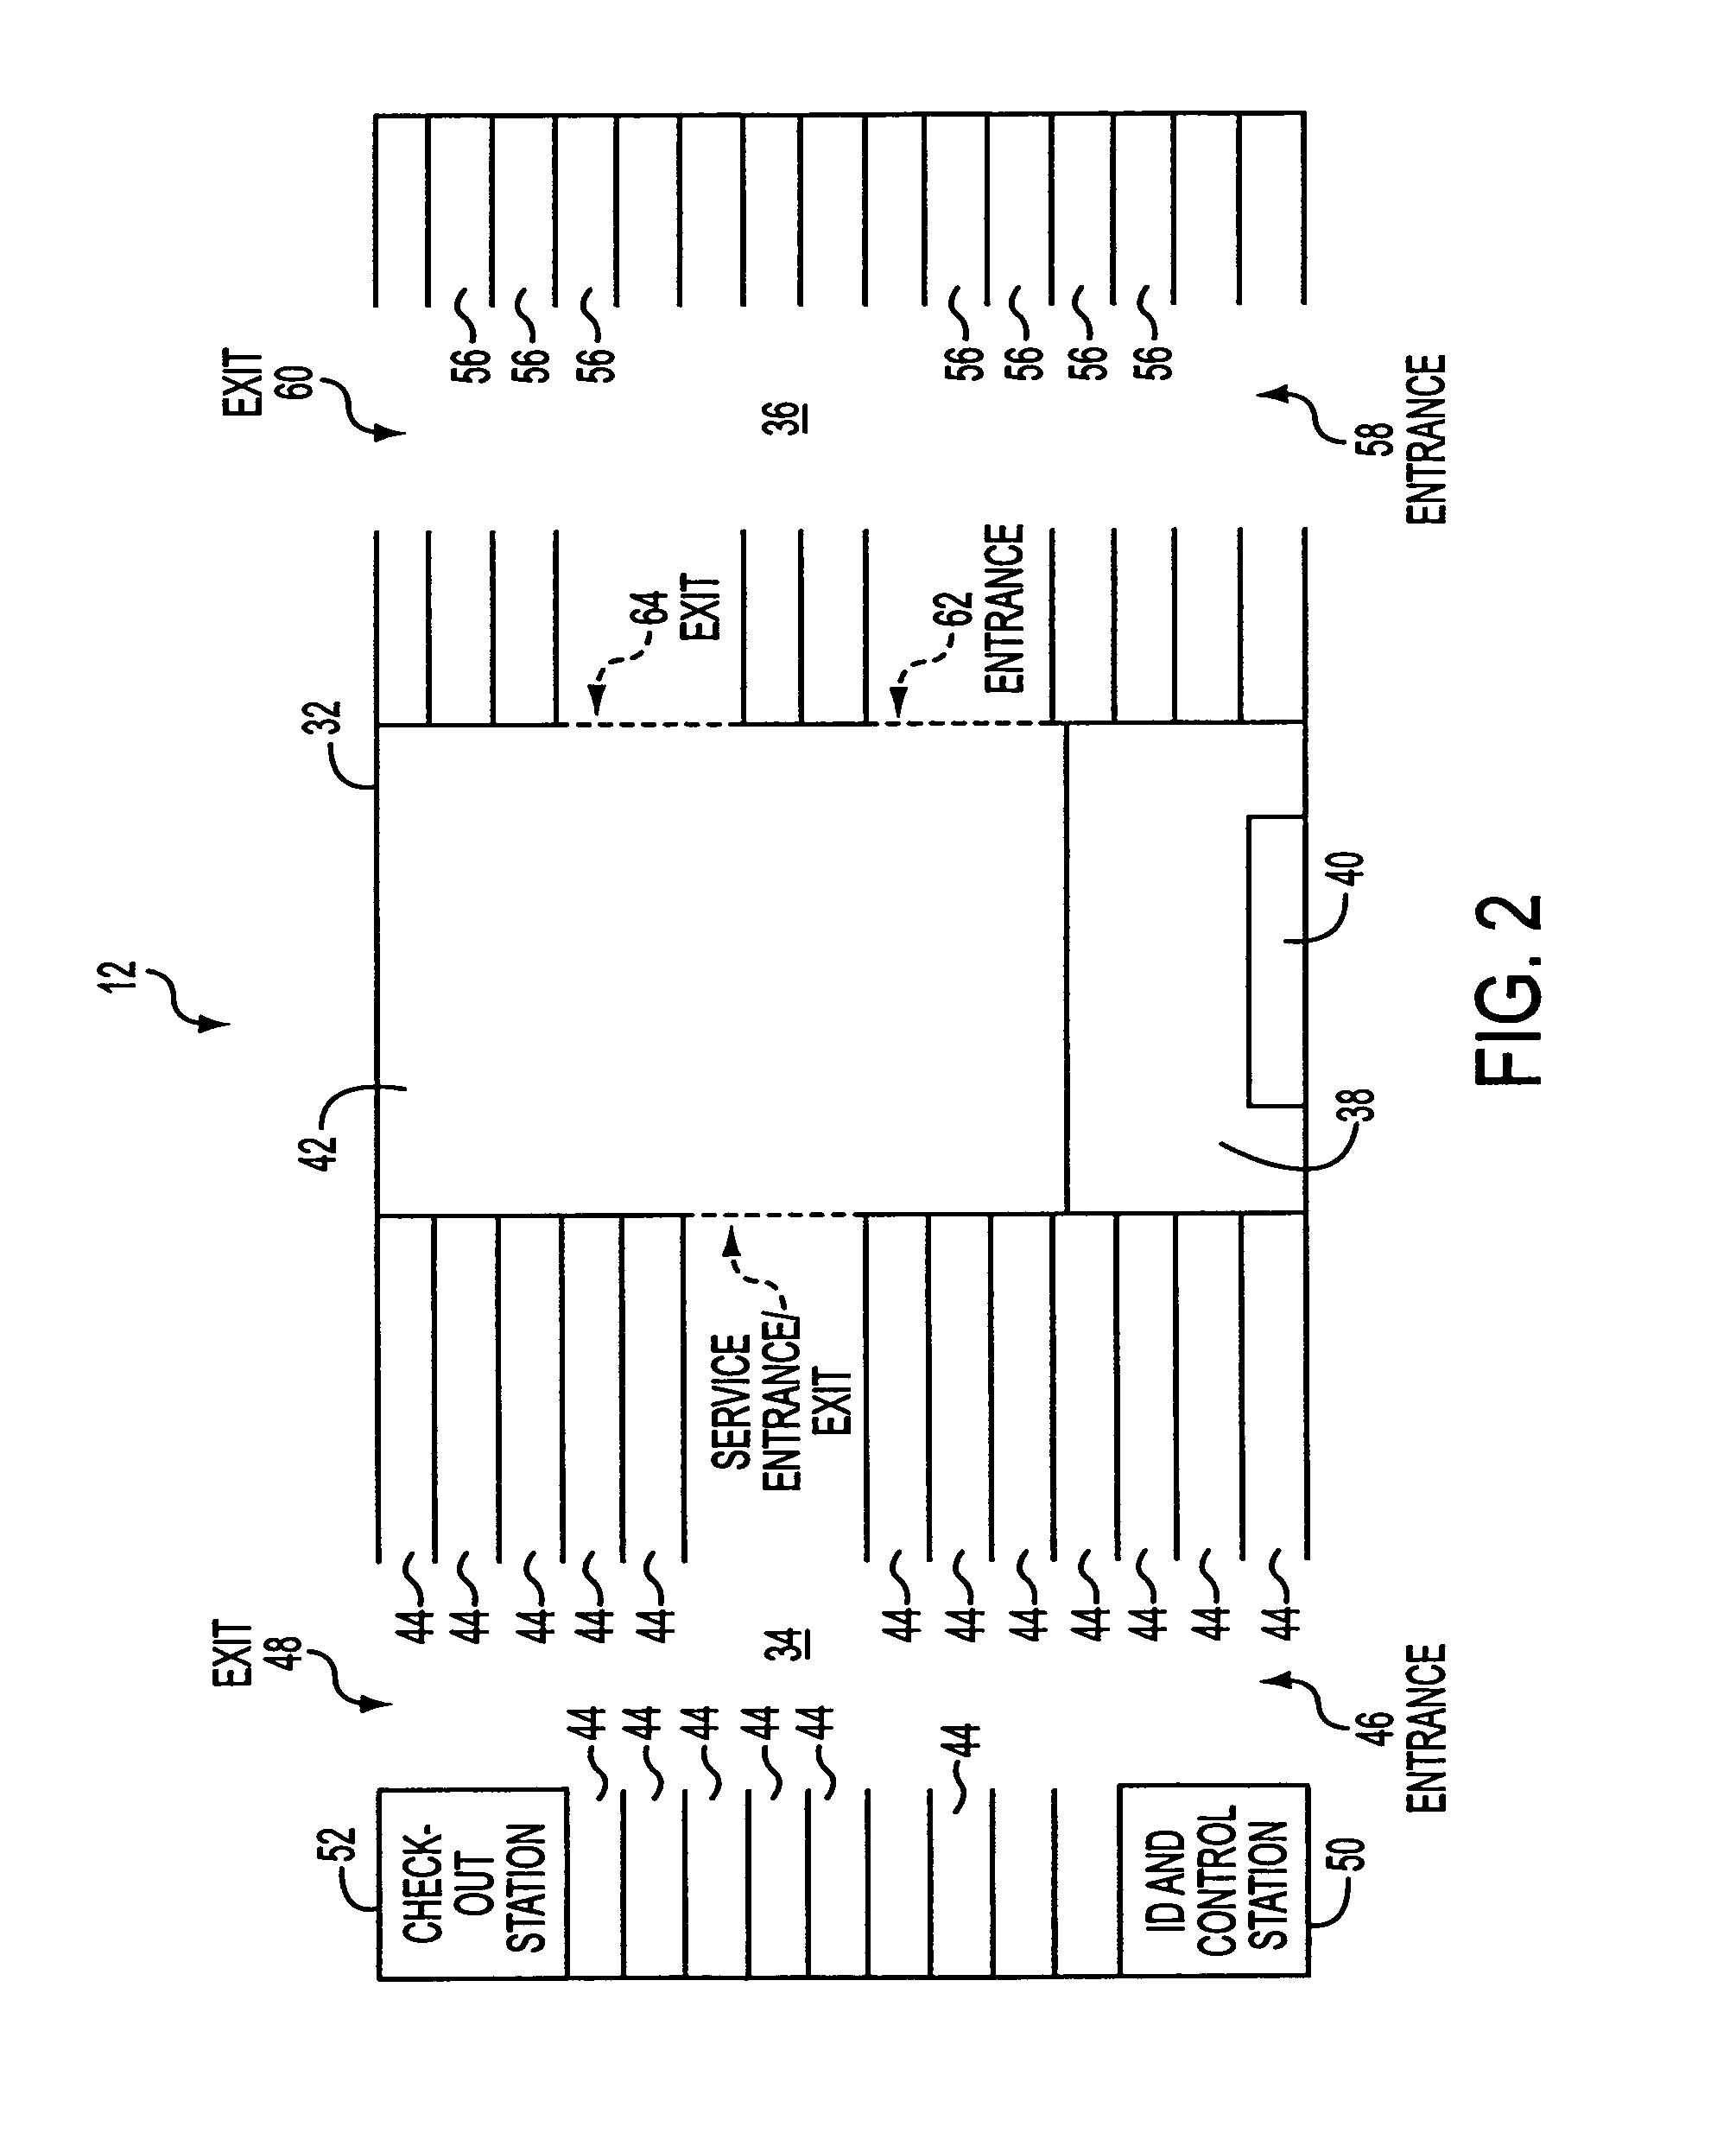 Retail system with drive-through check-out arrangement